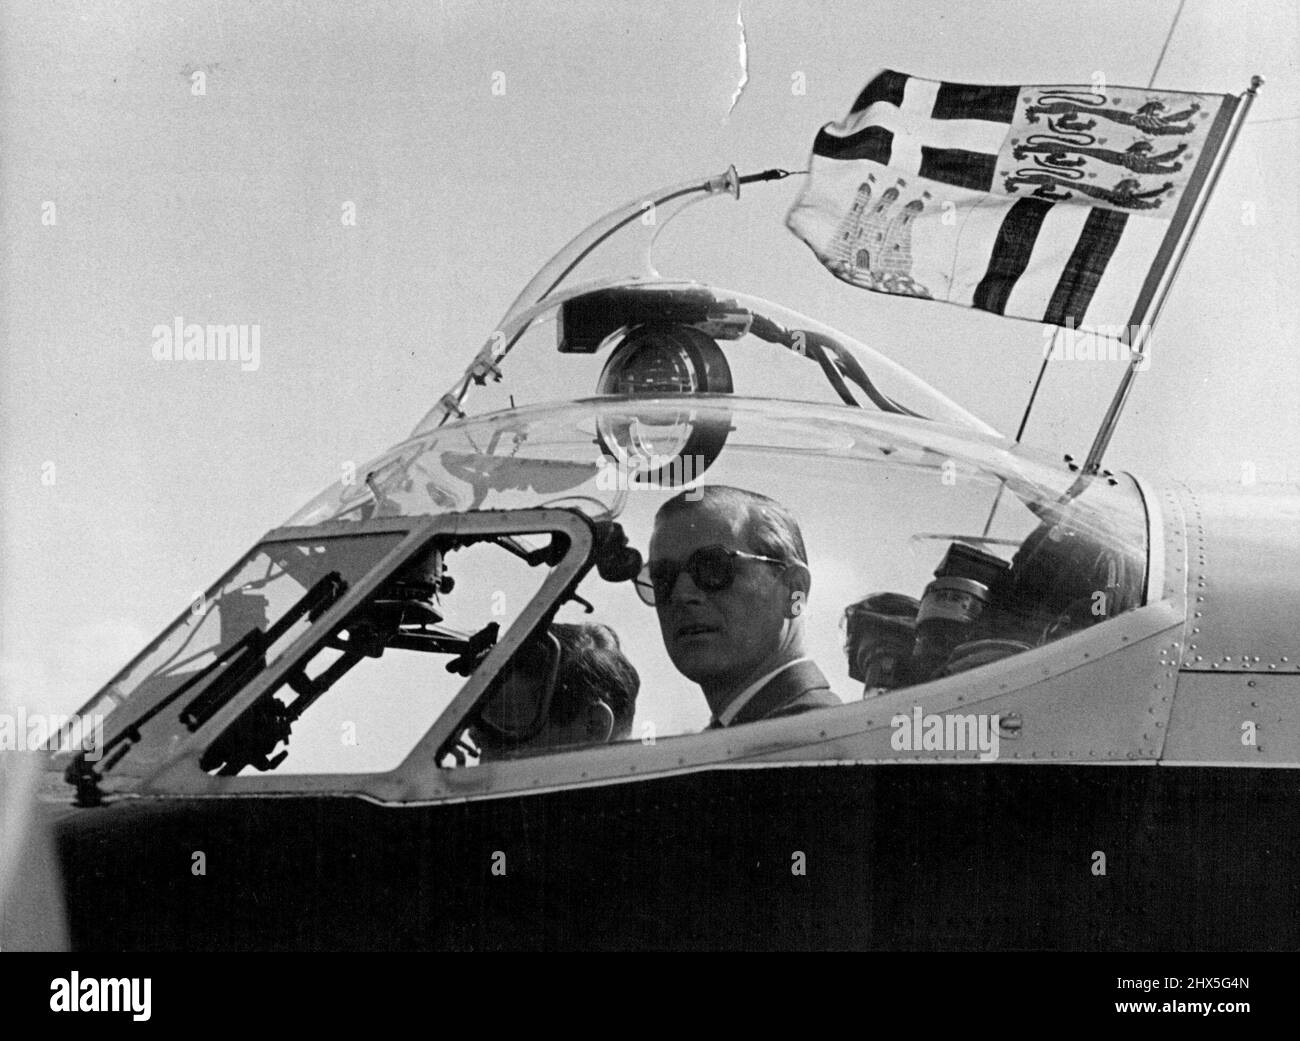 Duke Visits Rayon Centre -- The Duke at the Controls of his Dove Aircraft, flying of his Personal standard, prior to his return to London from the Manchester area. The Duke of Edinburgh, who is particularly interested in Developments in British science and Industry, visited the British Rayon centre at Northenden, near Manchester, yesterday. May 12, 1955. (Photo by Paul Popper Ltd.). Stock Photo